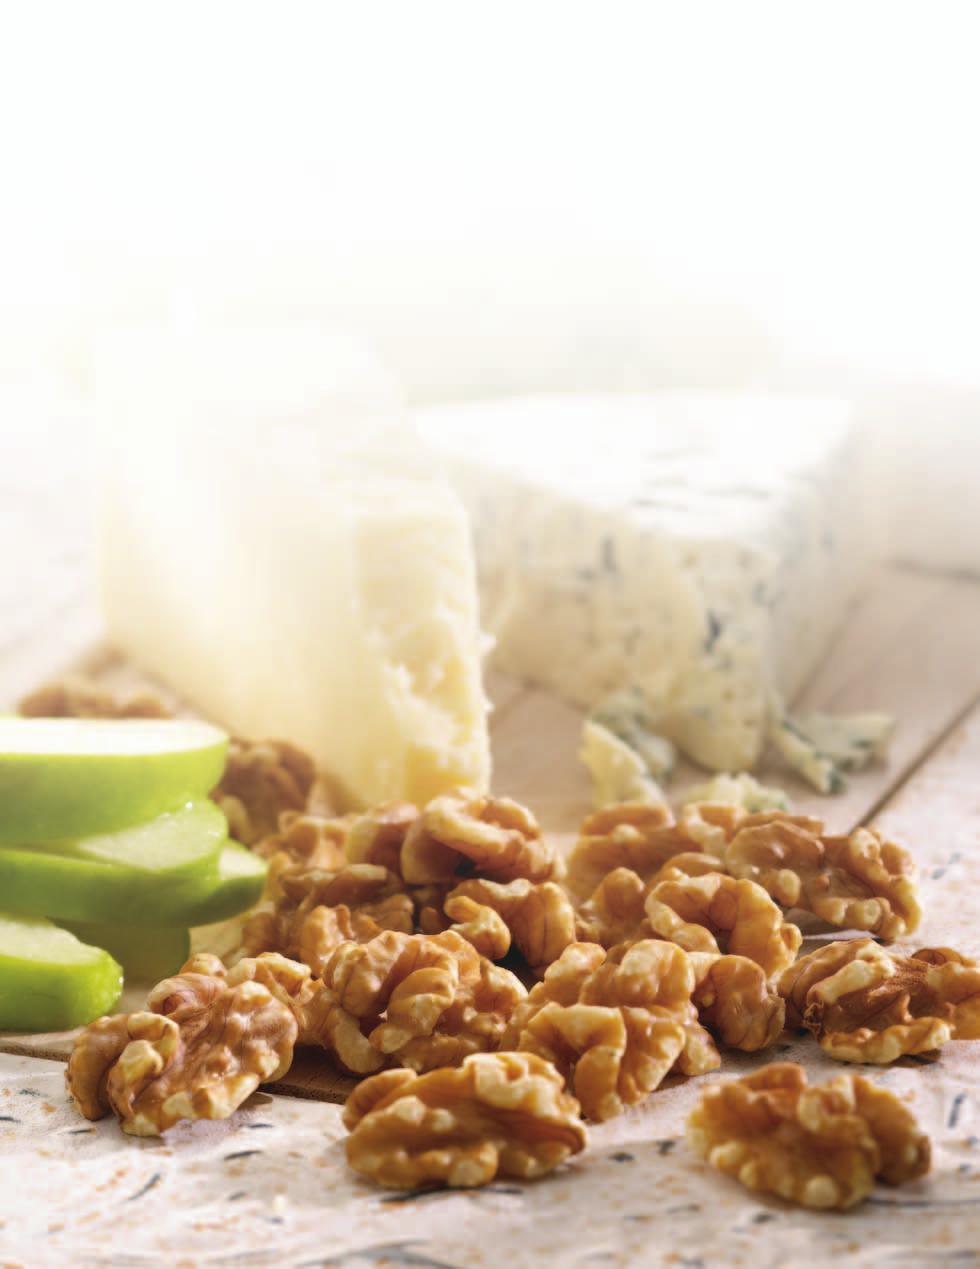 facts California Product Walnuts for Developers 87% 55% 79% 79% 63% 86% 86% 82% 76% of walnut purchasers believe walnuts are healthy. are buying walnuts more often than 5 years ago.